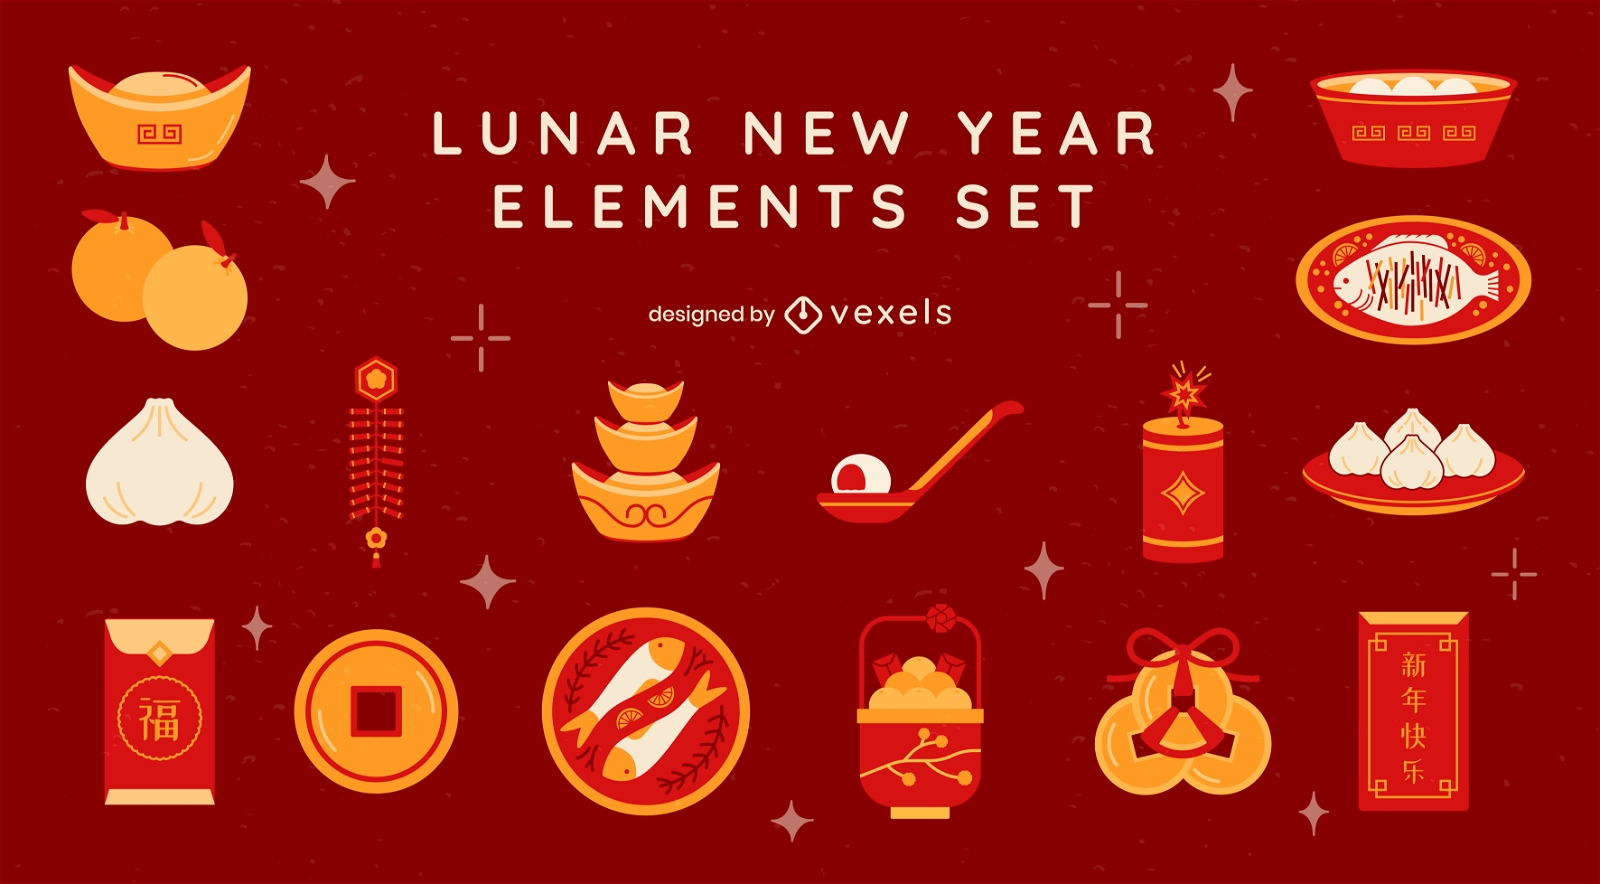 Chinese new year elements set design